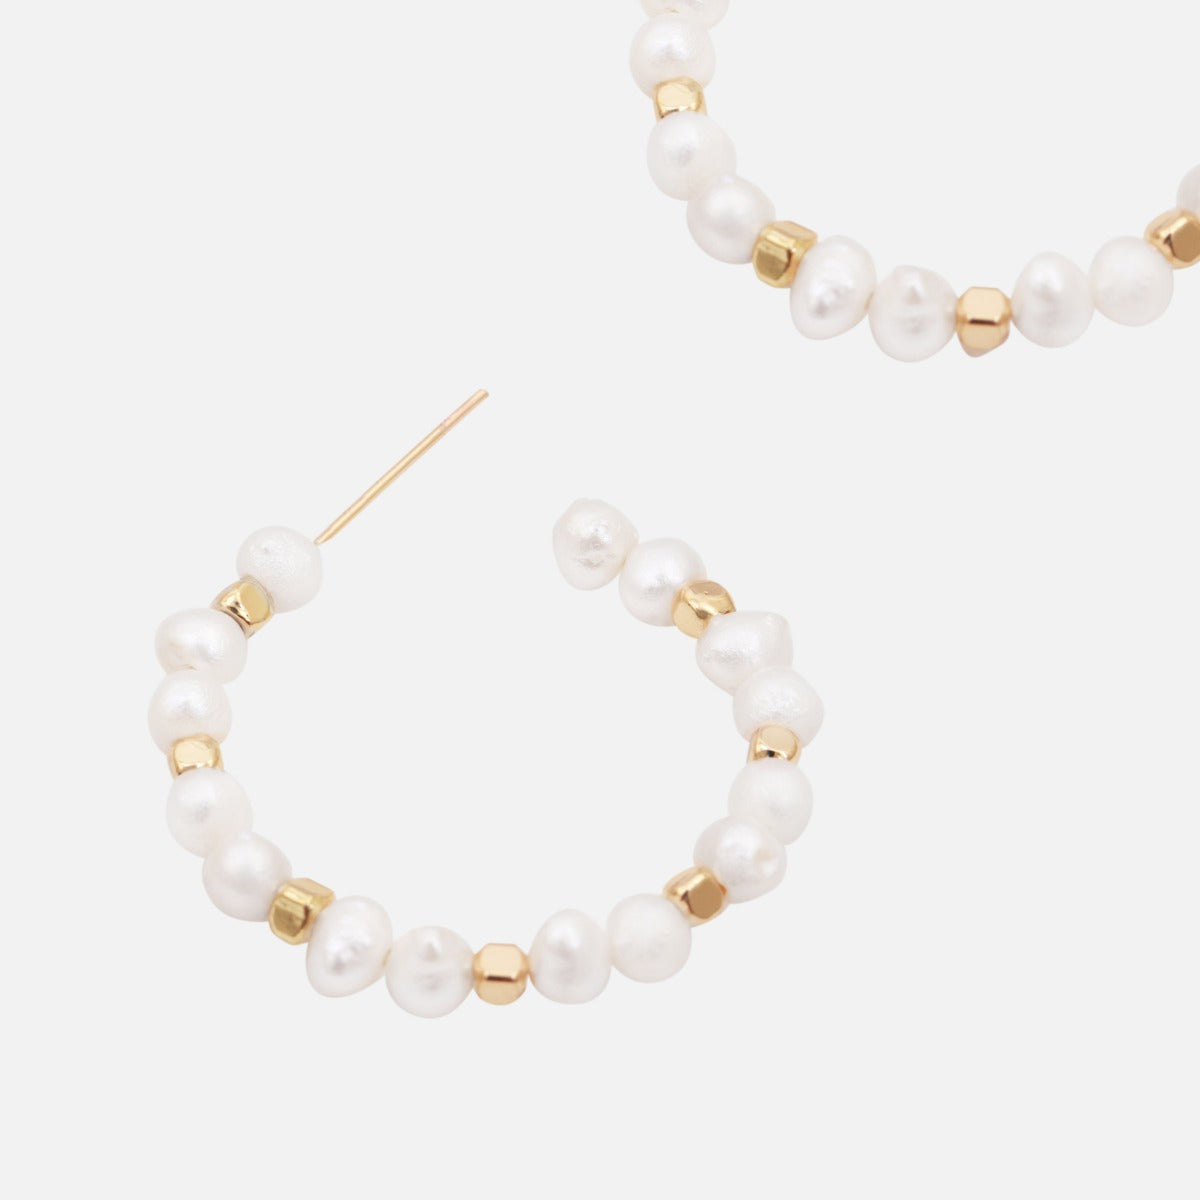 Hoop earrings with pearls and golden beads